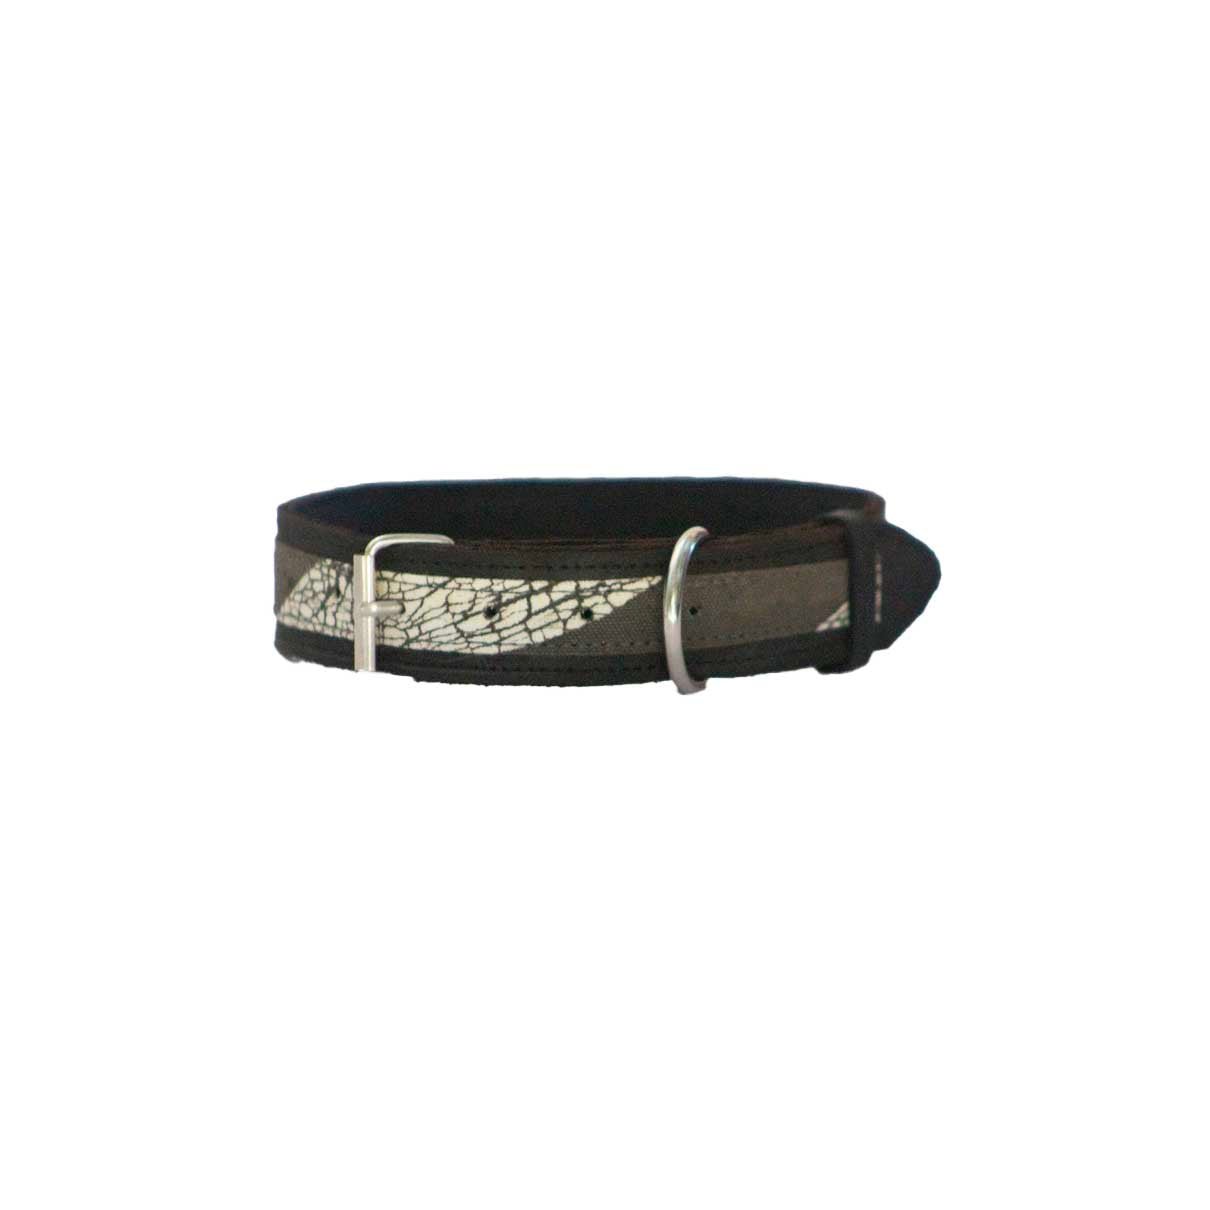 Ethically handcrafted dog collar with Zebra print handcrafted in Zambia for conservation.